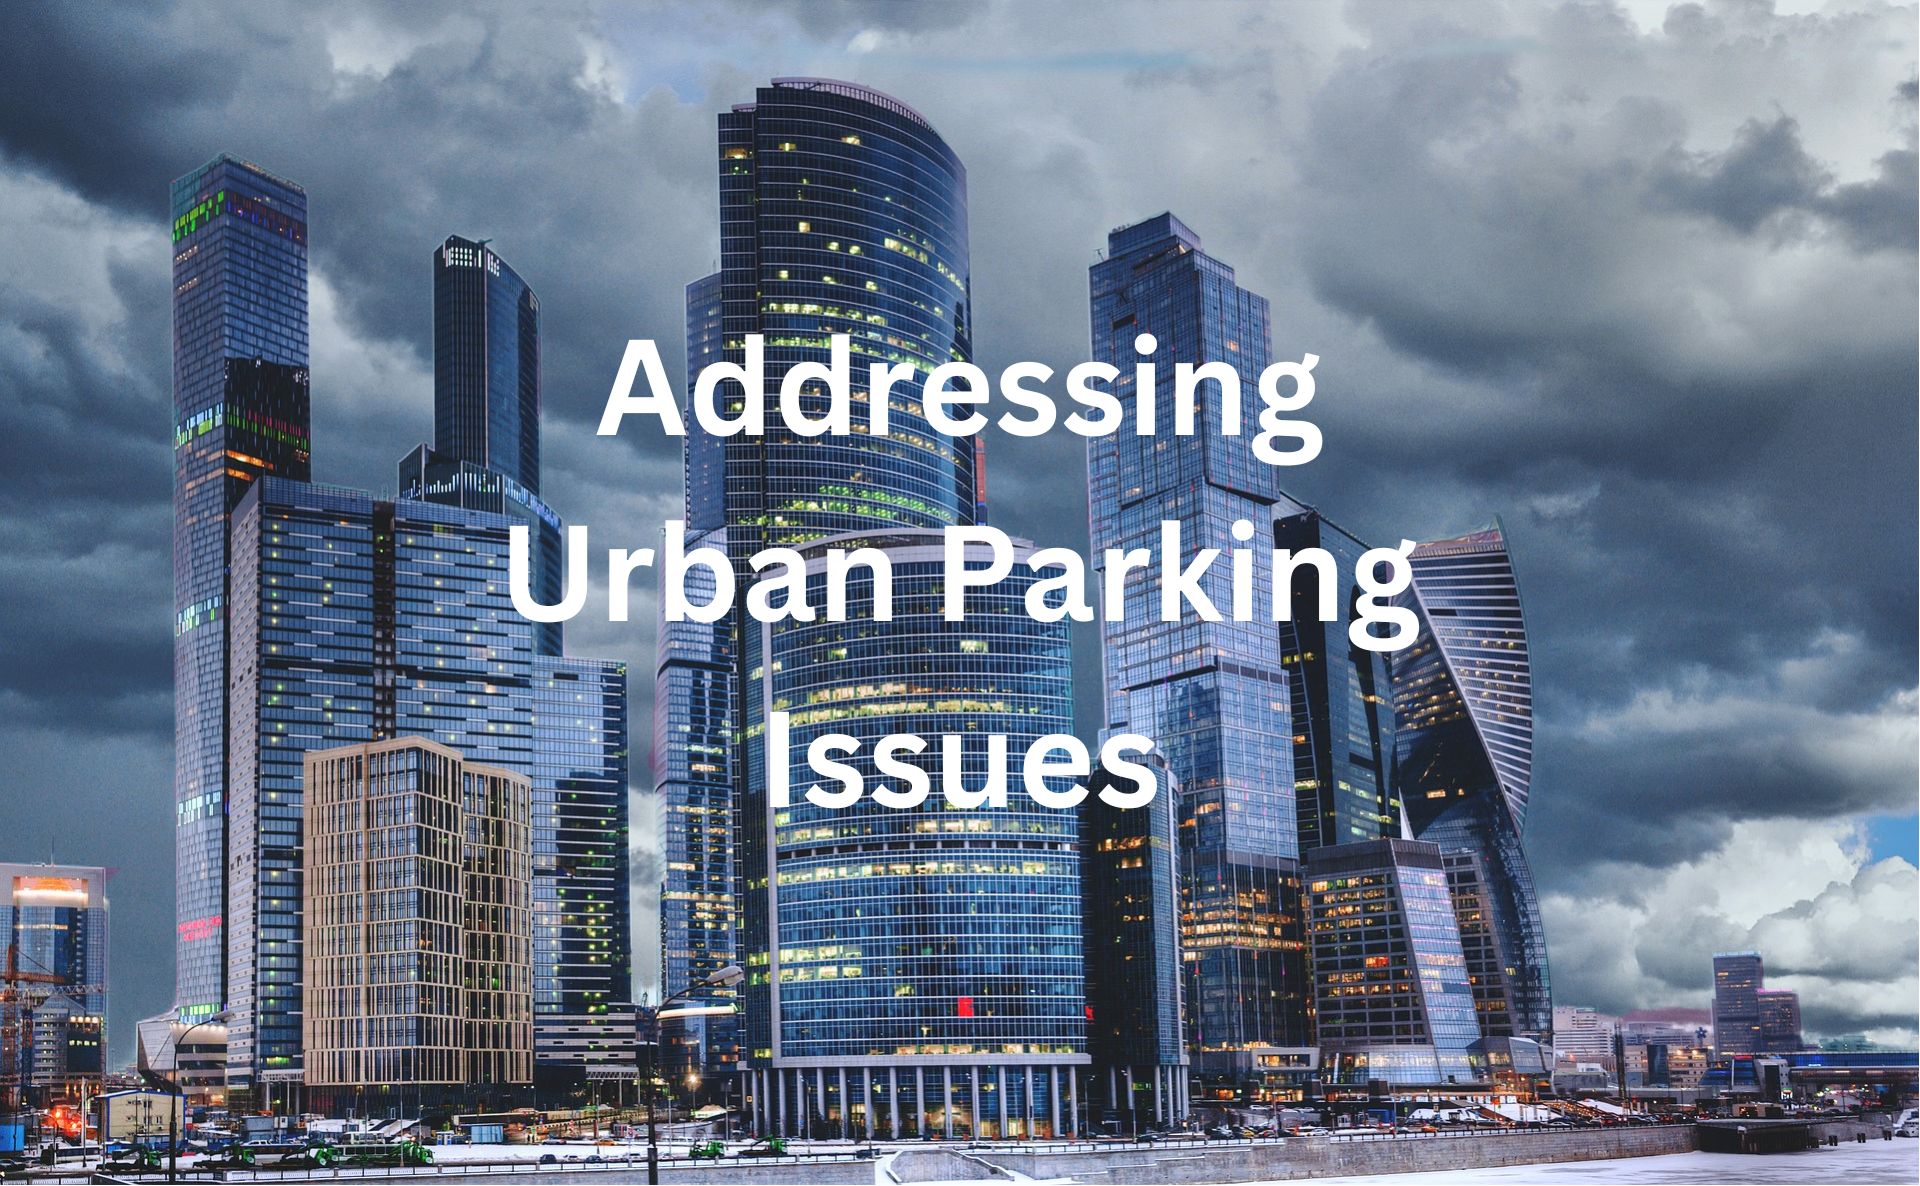 Addressing Urban Parking Issues